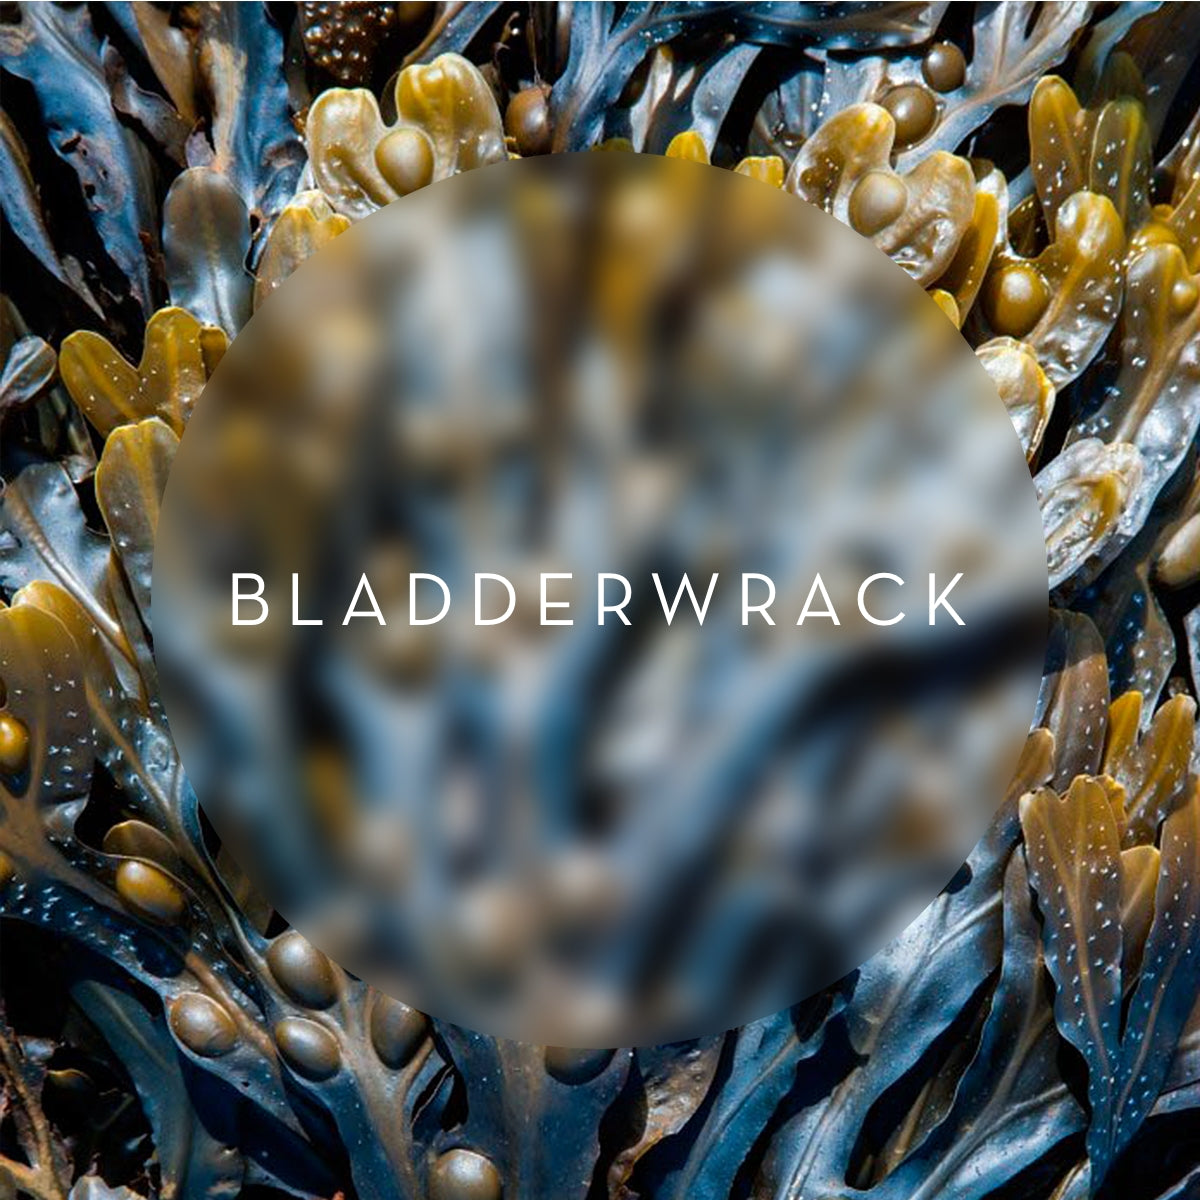 What Makes Bladderwrack So Good For Your Skin